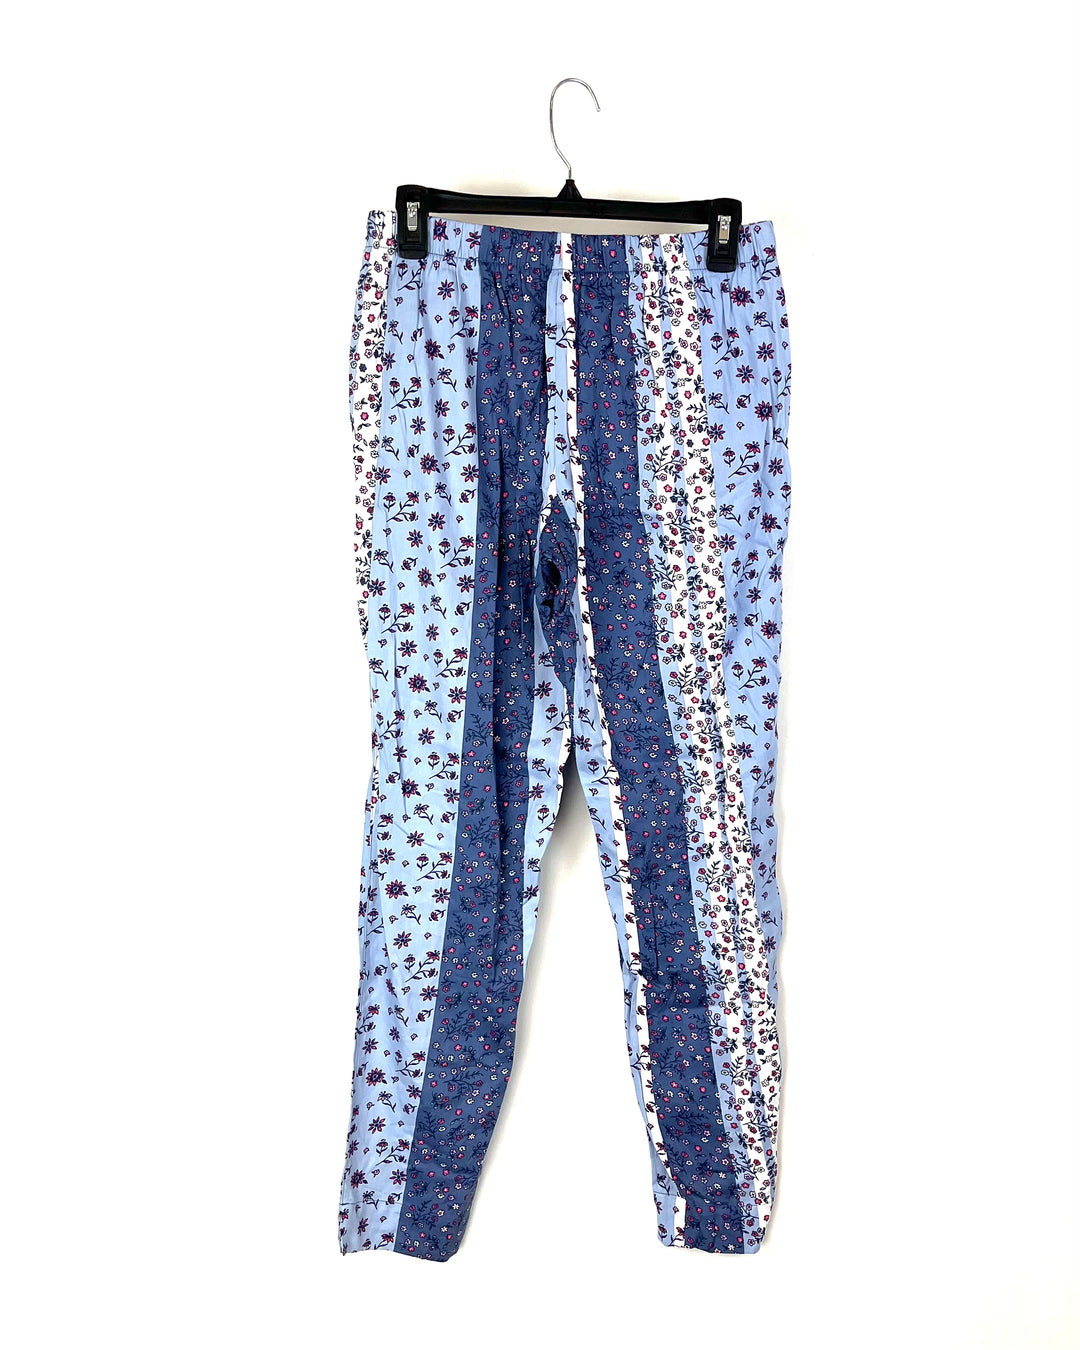 Blue And White Floral Pajama Pants - Small